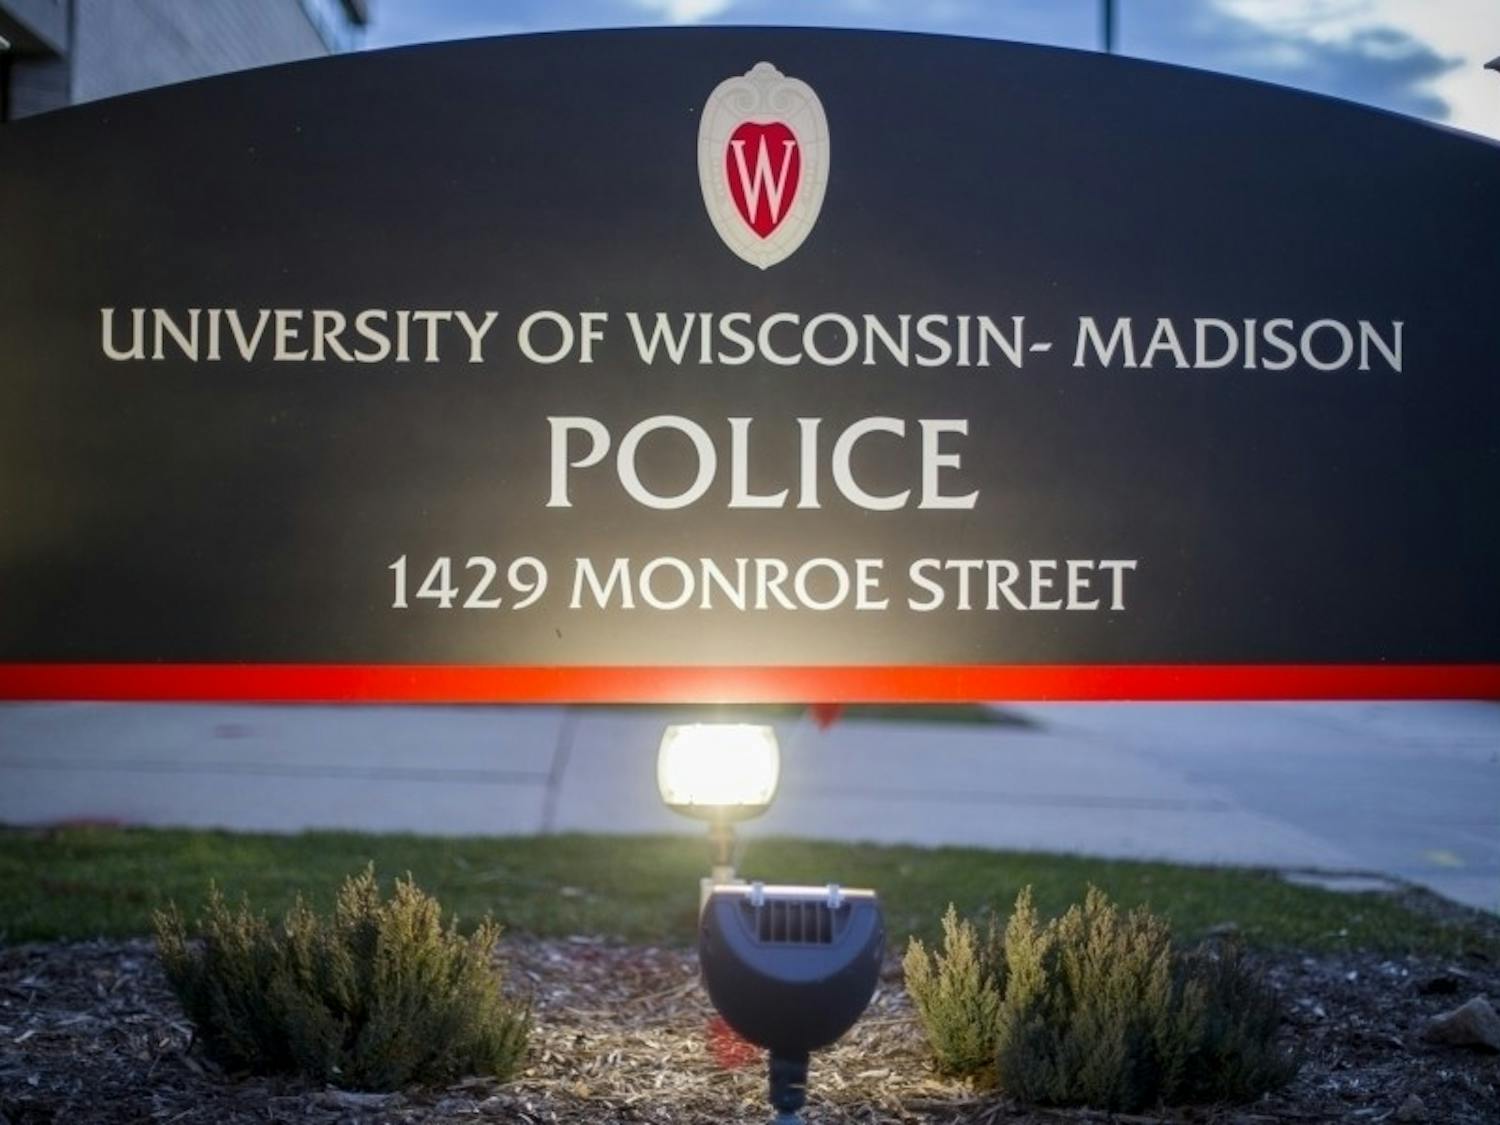 The attempted strong-arm robbery is the second to occur on the UW-Madison campus in less than 24 hours.